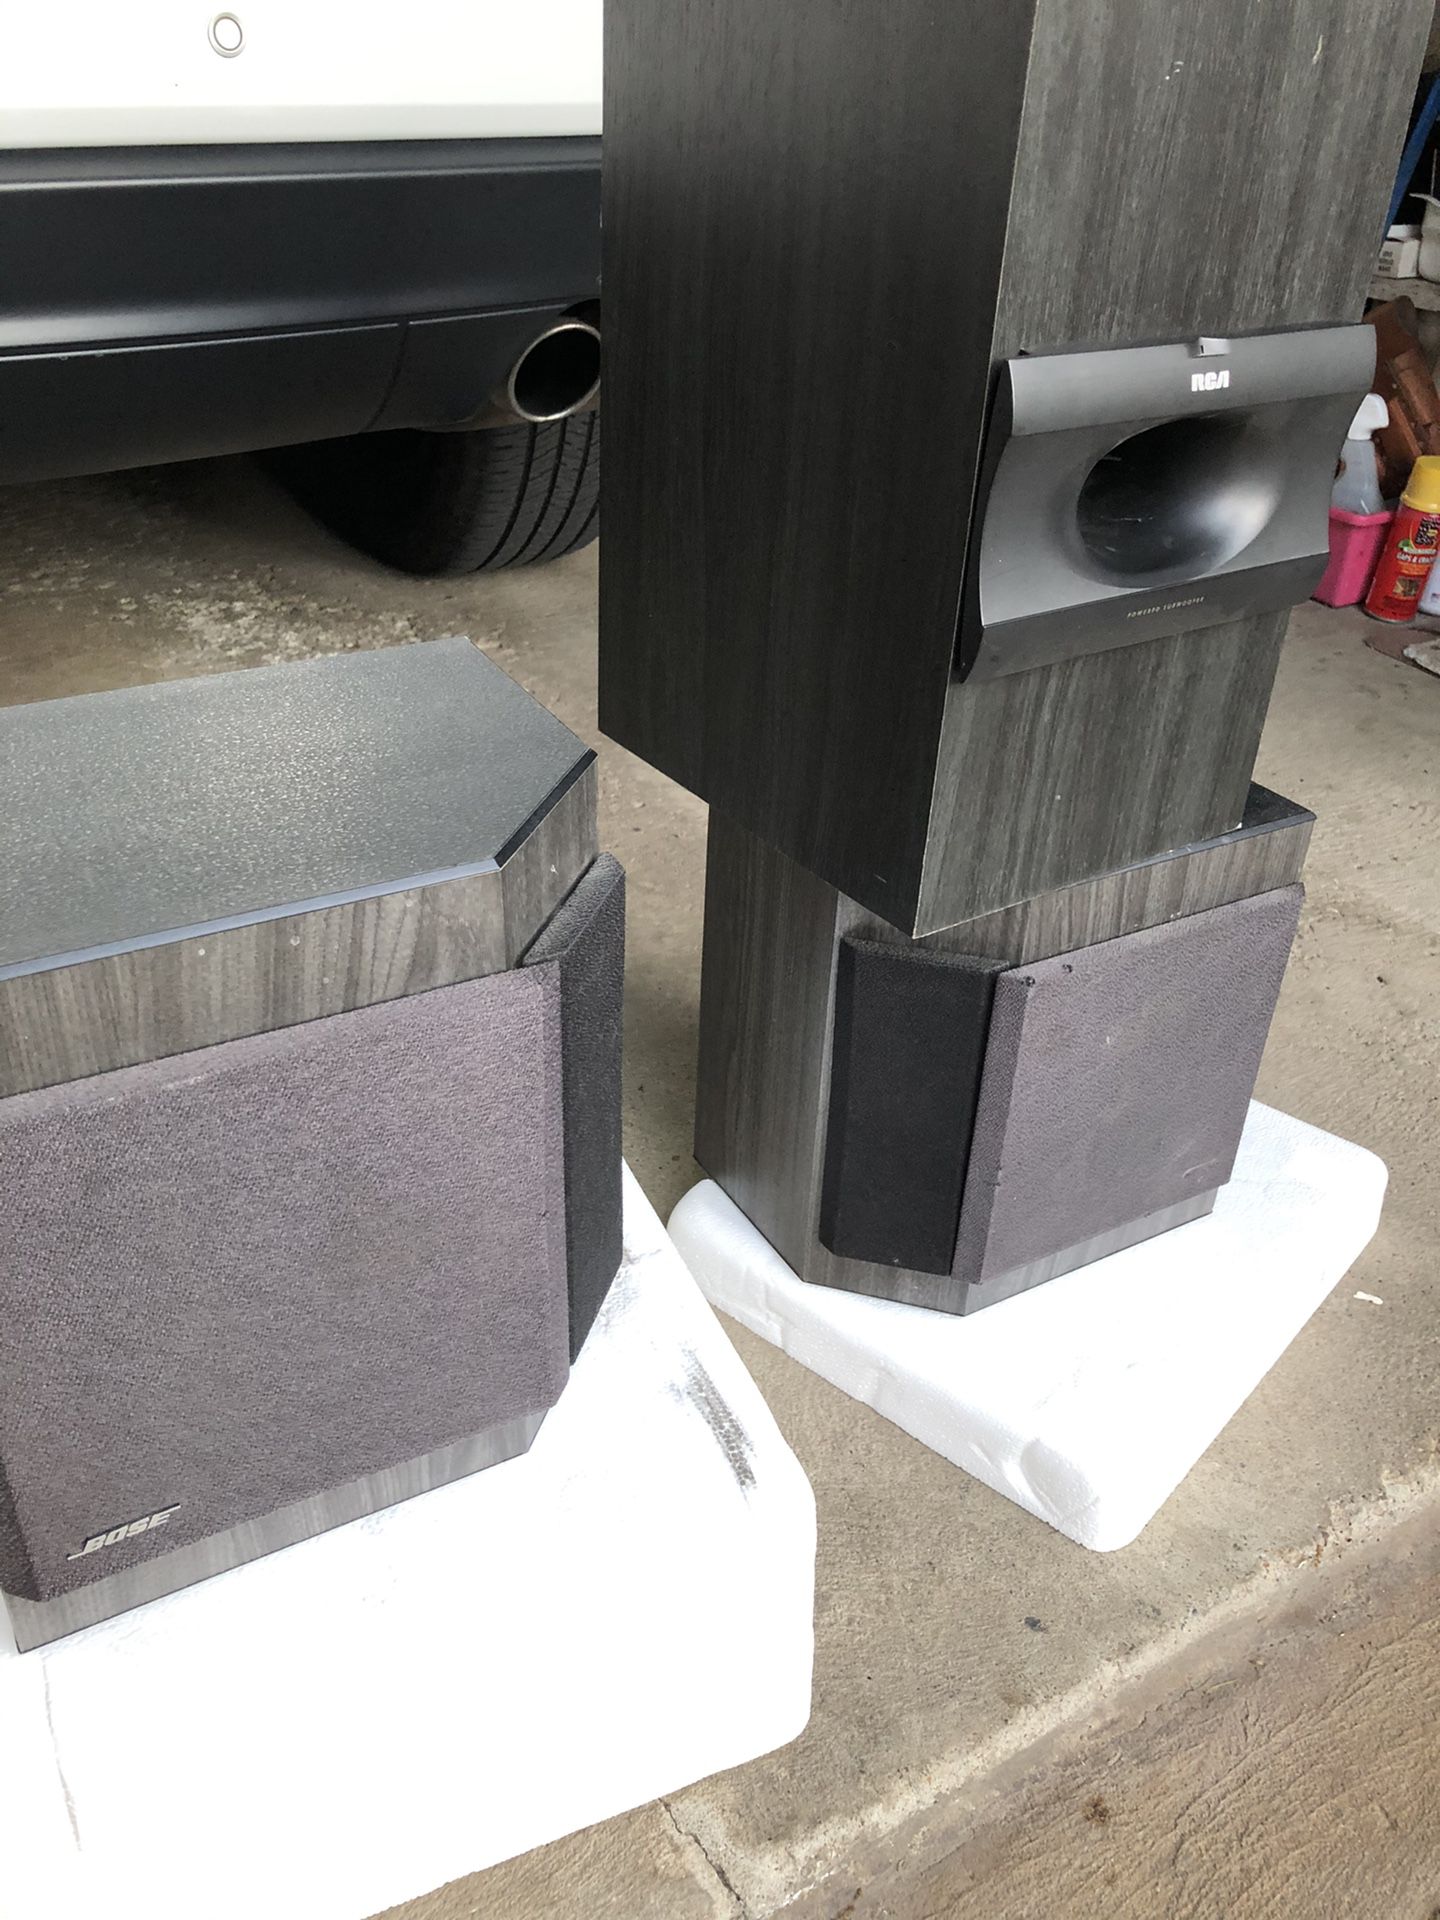 Pair of Bose 2001 speakers and sub woofer